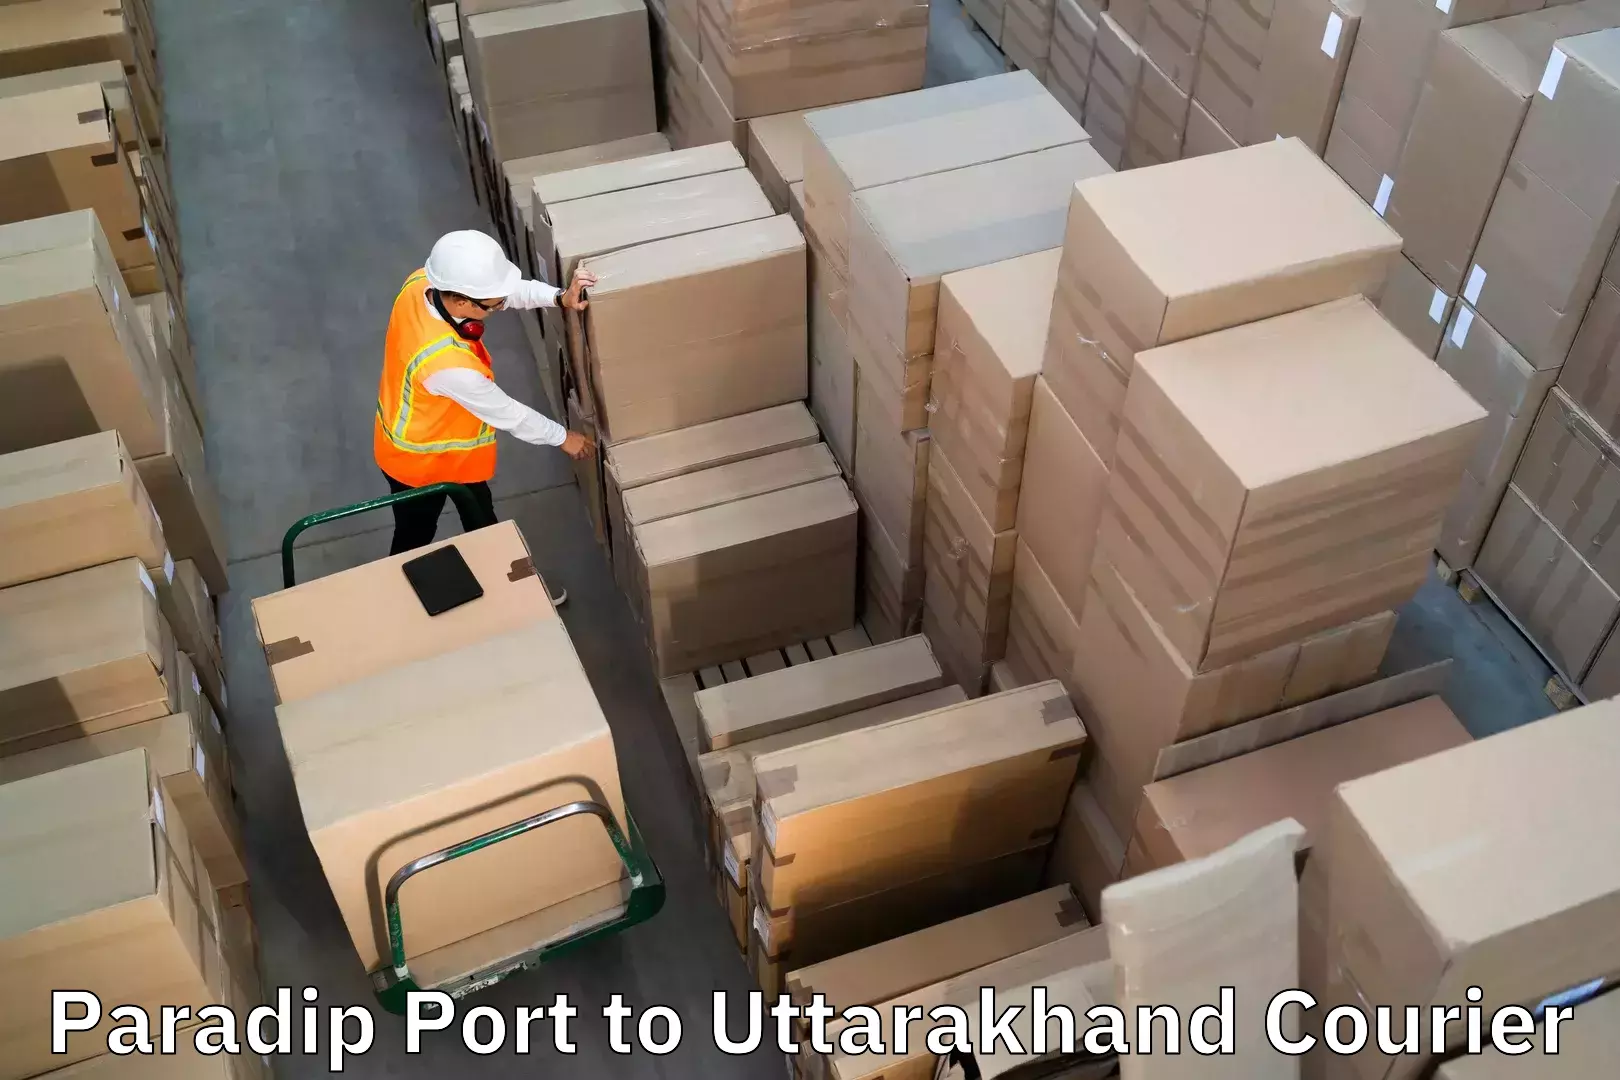 Online luggage shipping booking Paradip Port to IIT Roorkee